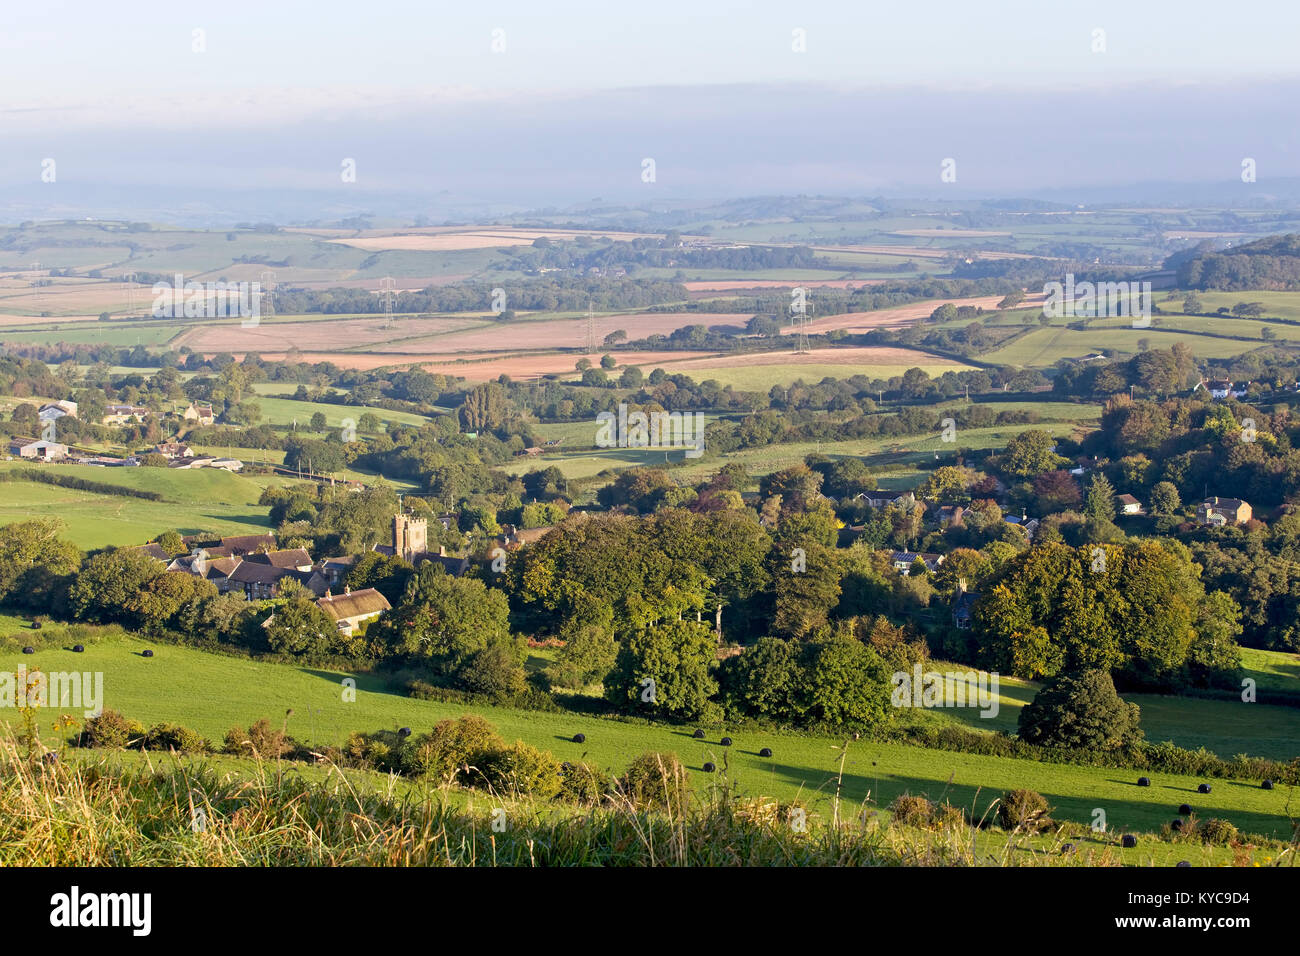 The village of Askerswell nestled in a Dorset valley, near Bridport, Dorset, England, UK. Stock Photo